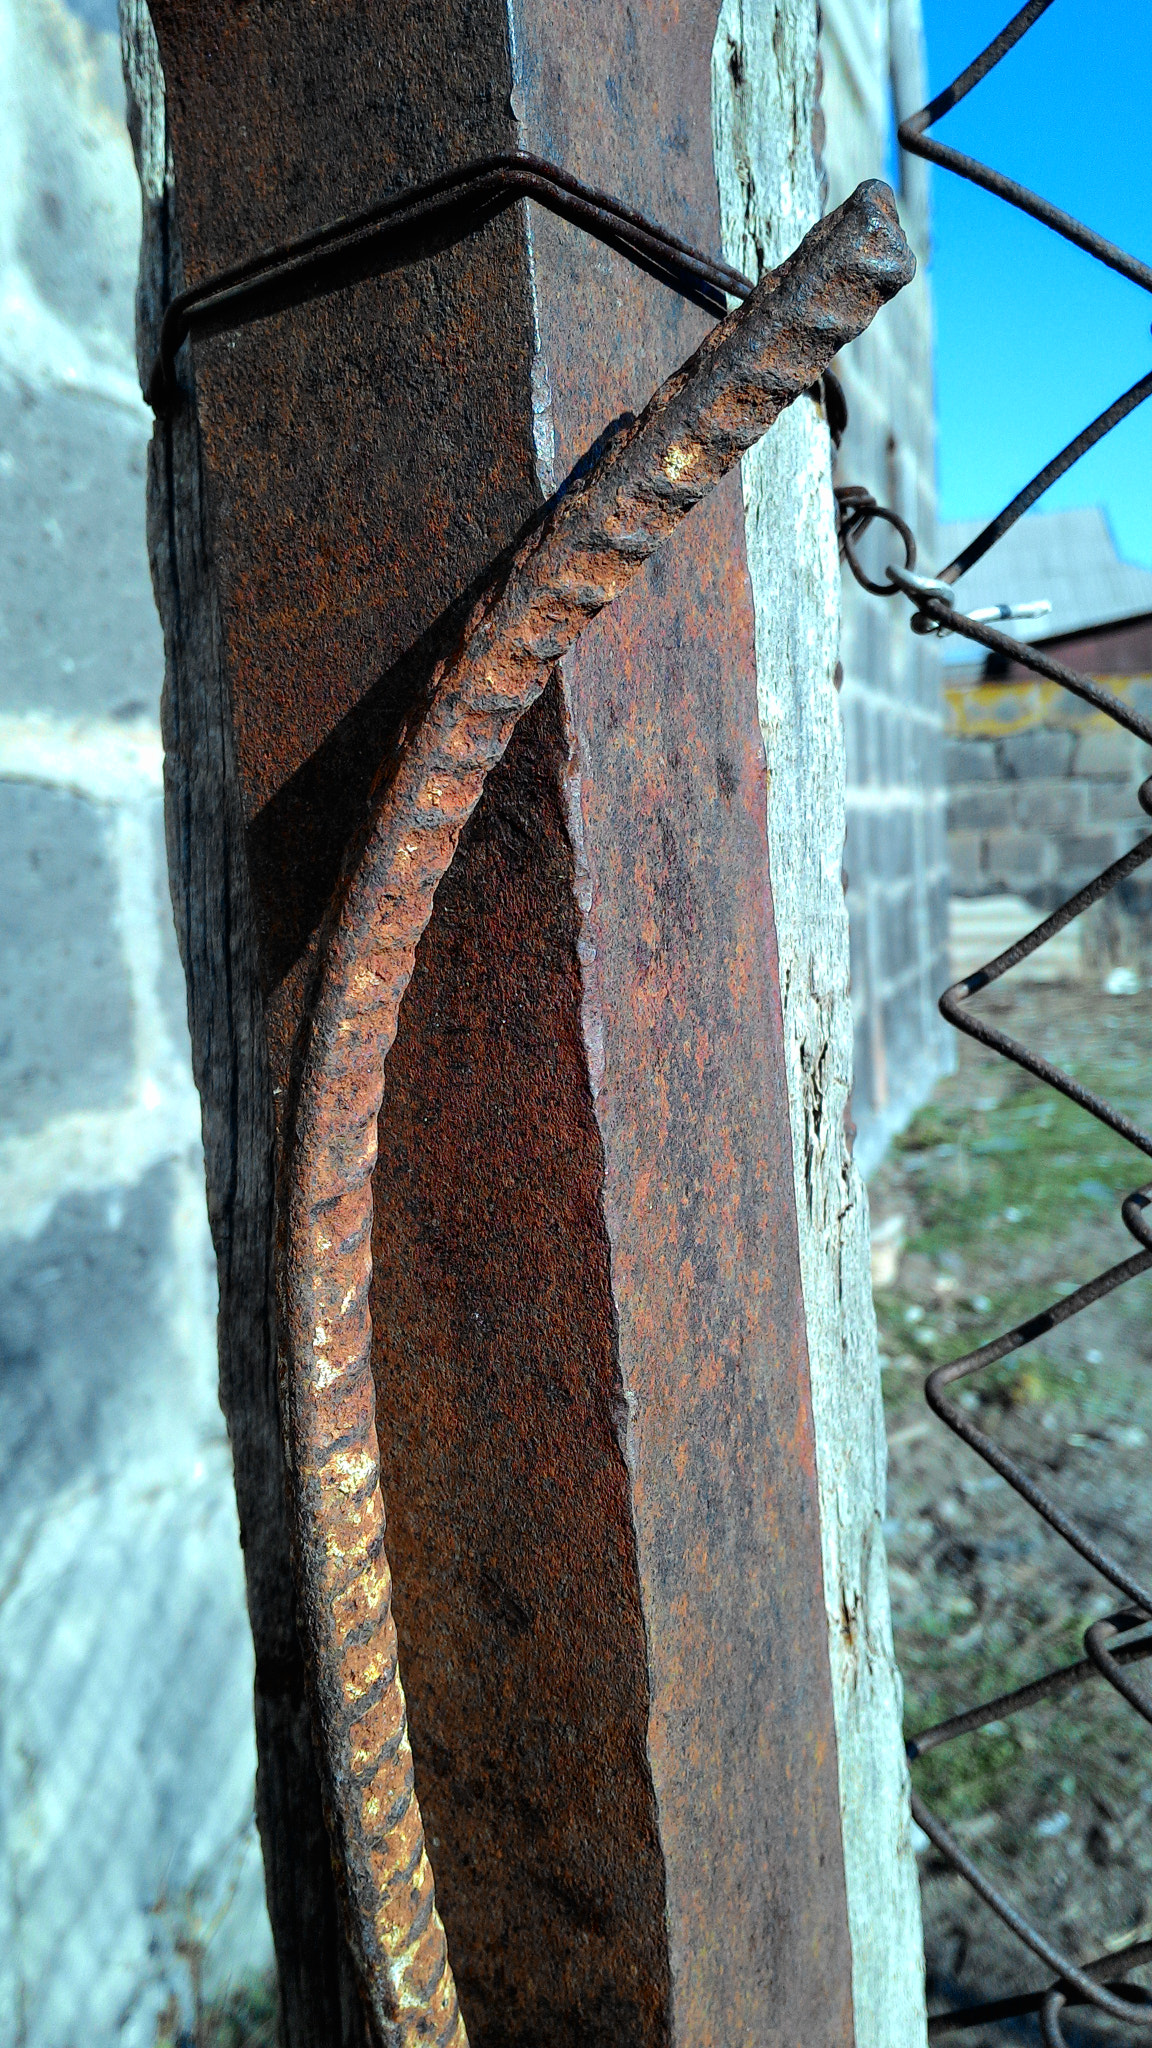 ASUS Z002 sample photo. A rusty rod photography